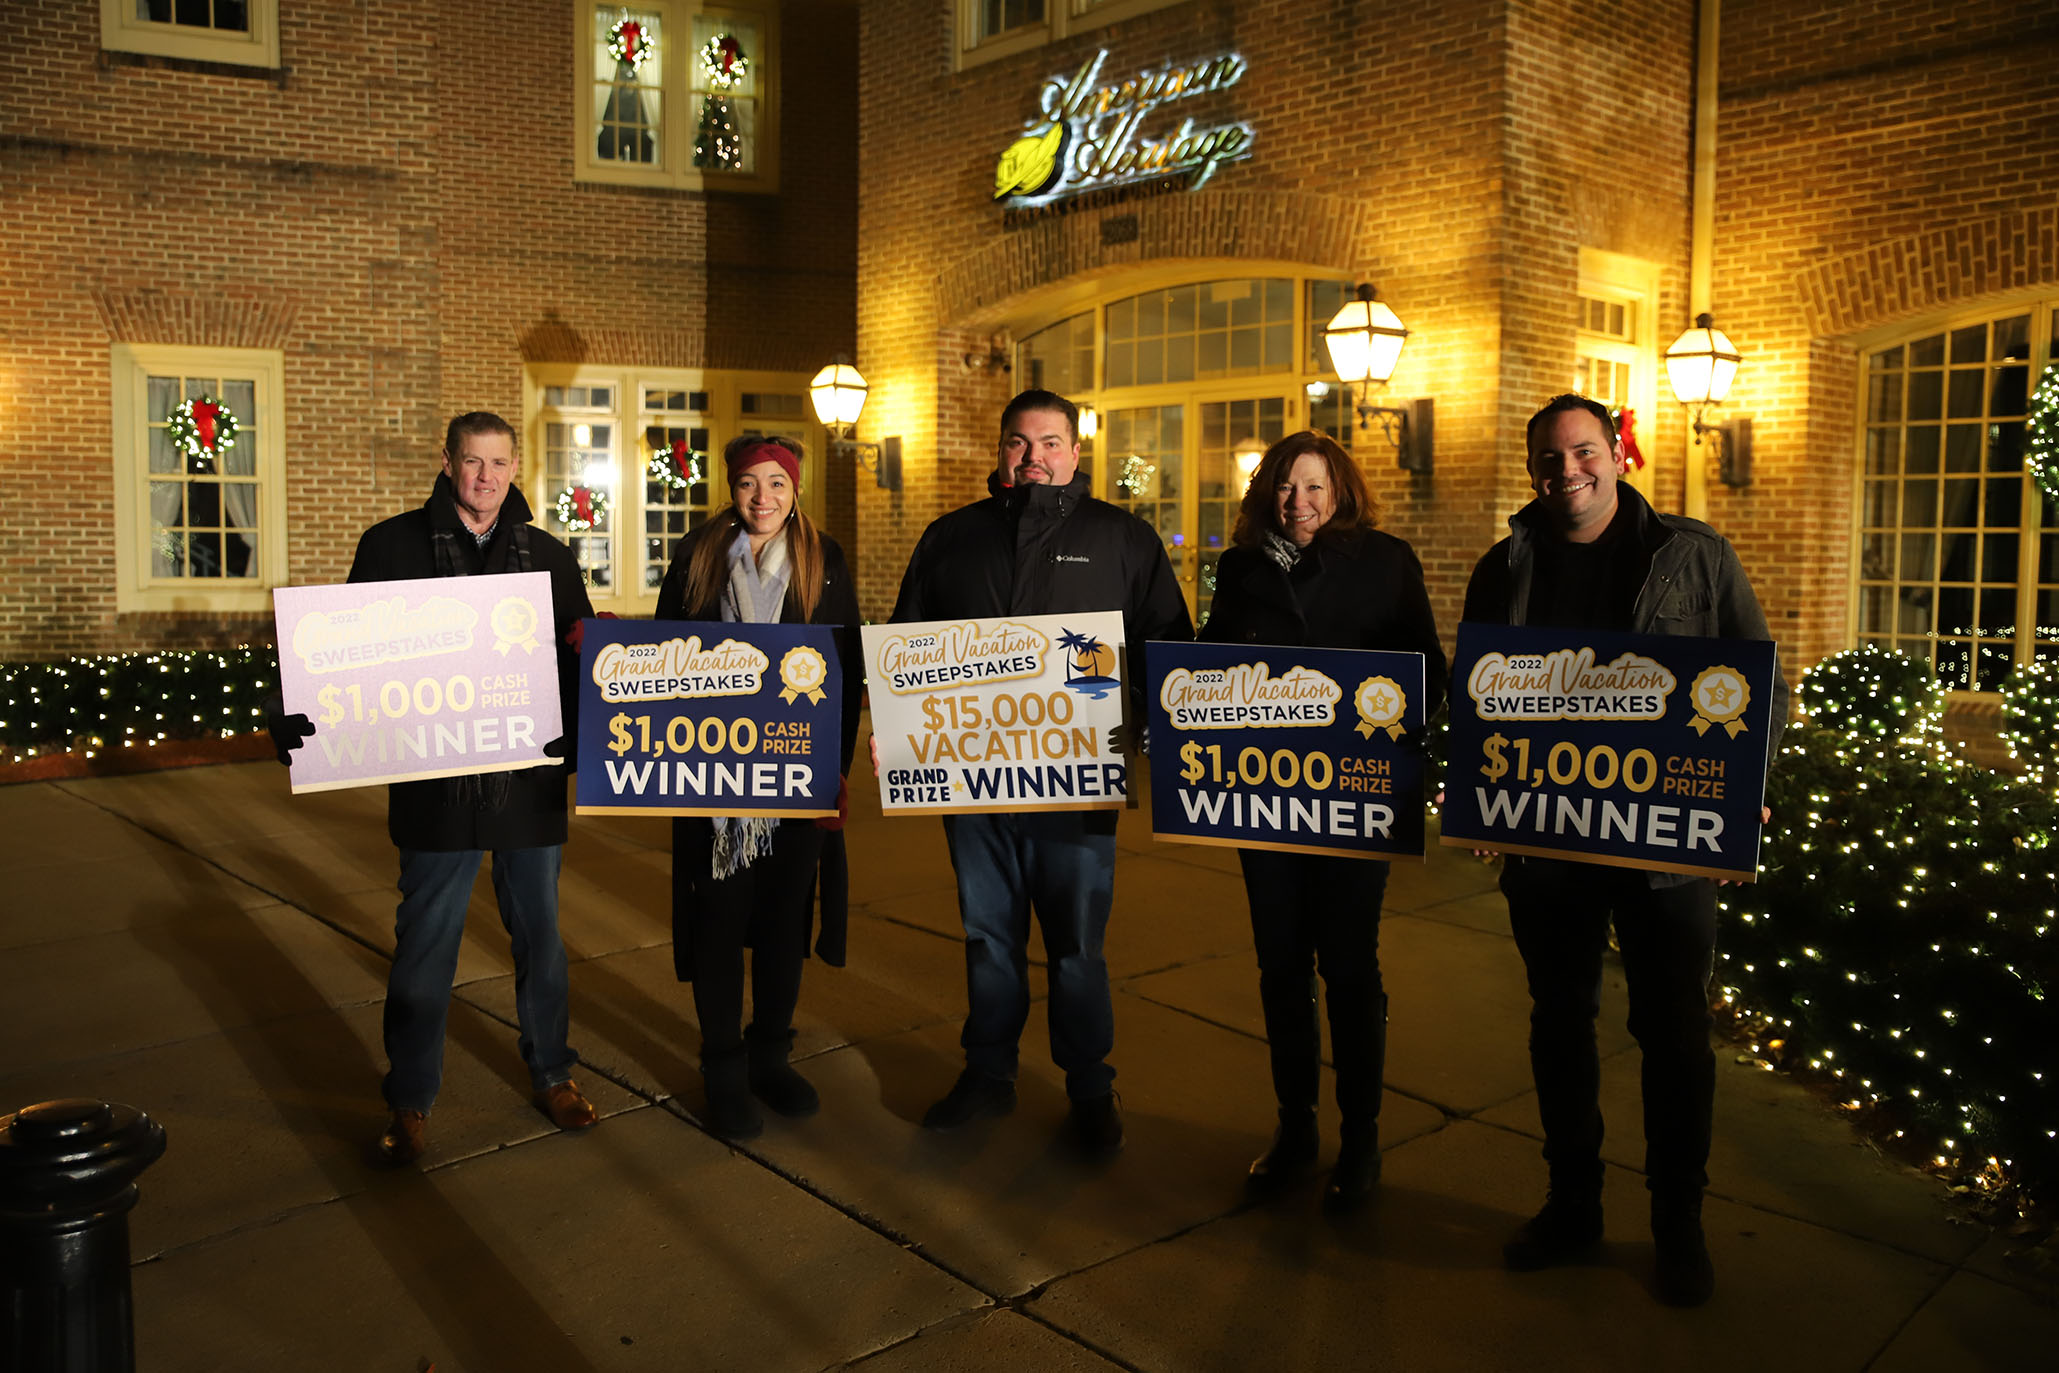 The five finalist of the Grand Vacation Sweepstakes stand together displaying their amount won.